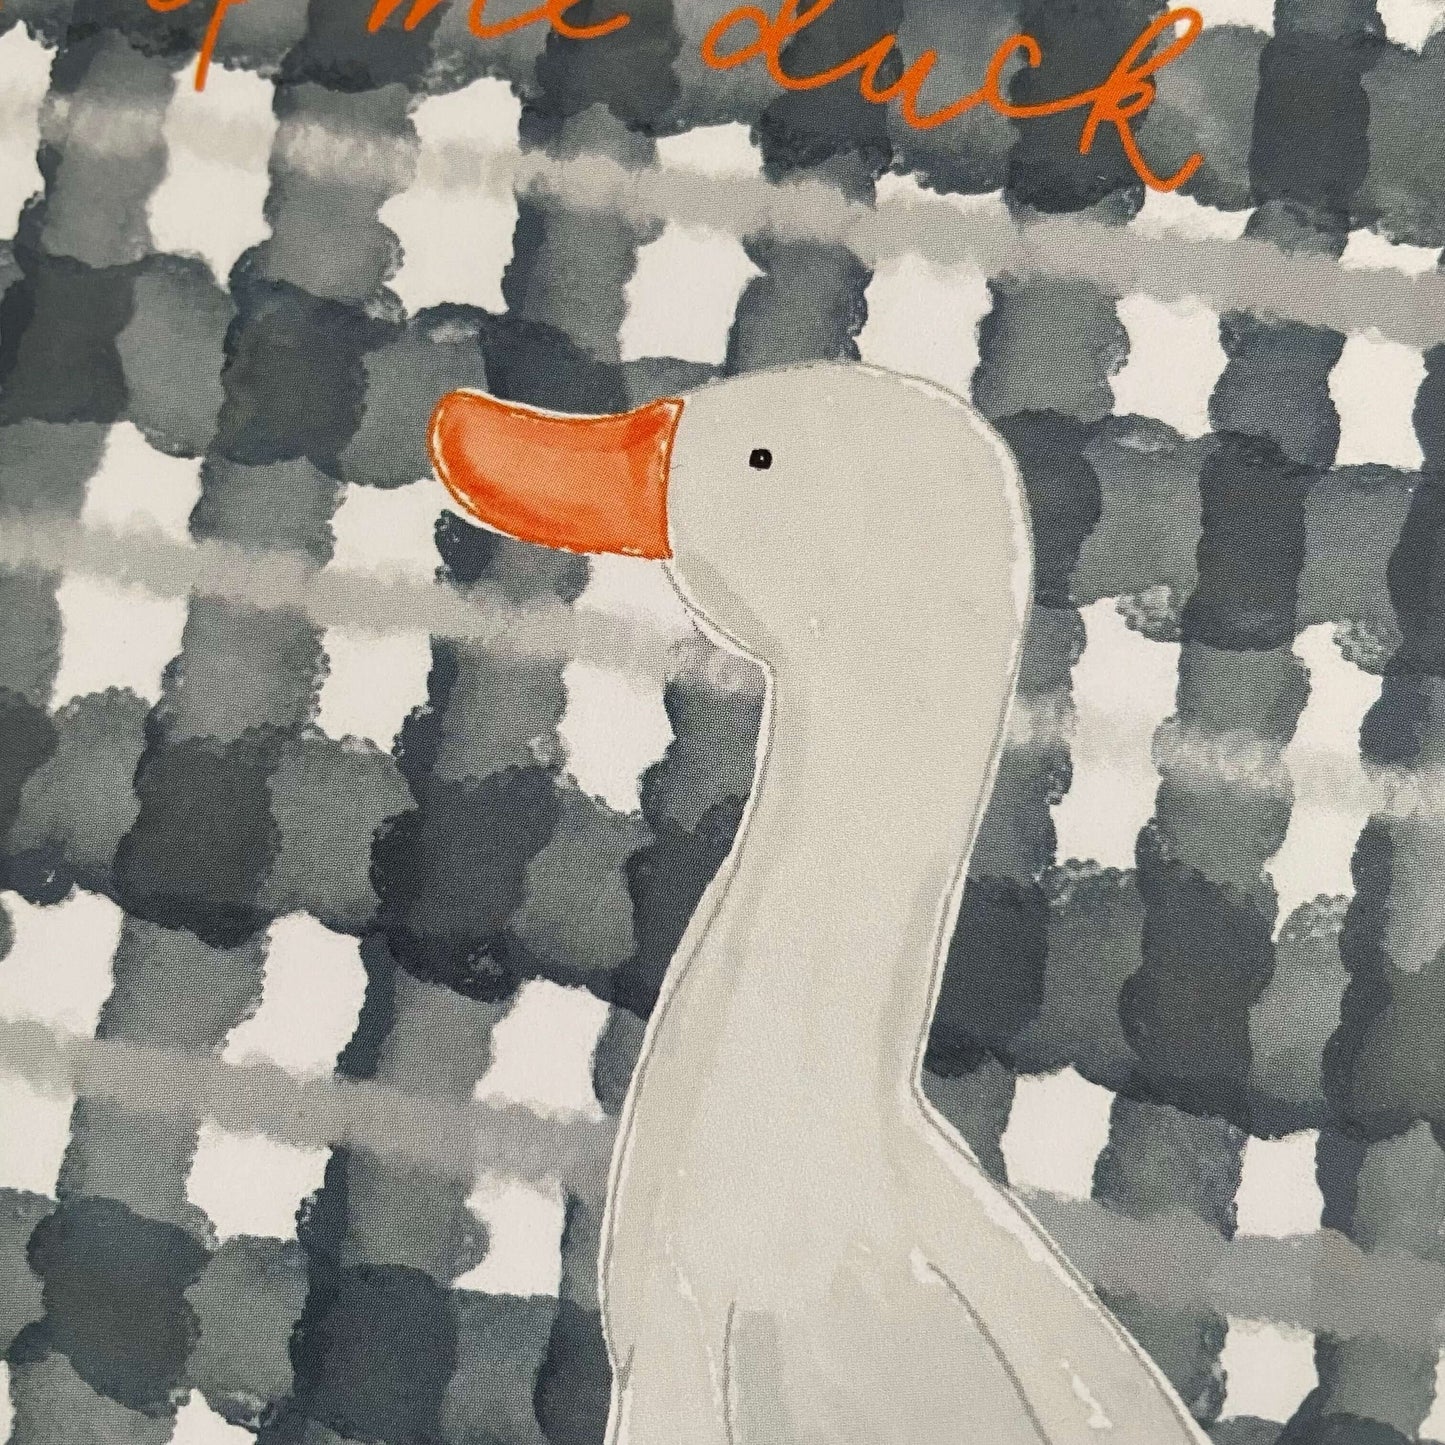 Ay up me duck gingham greeting card And Hope Designs Cards